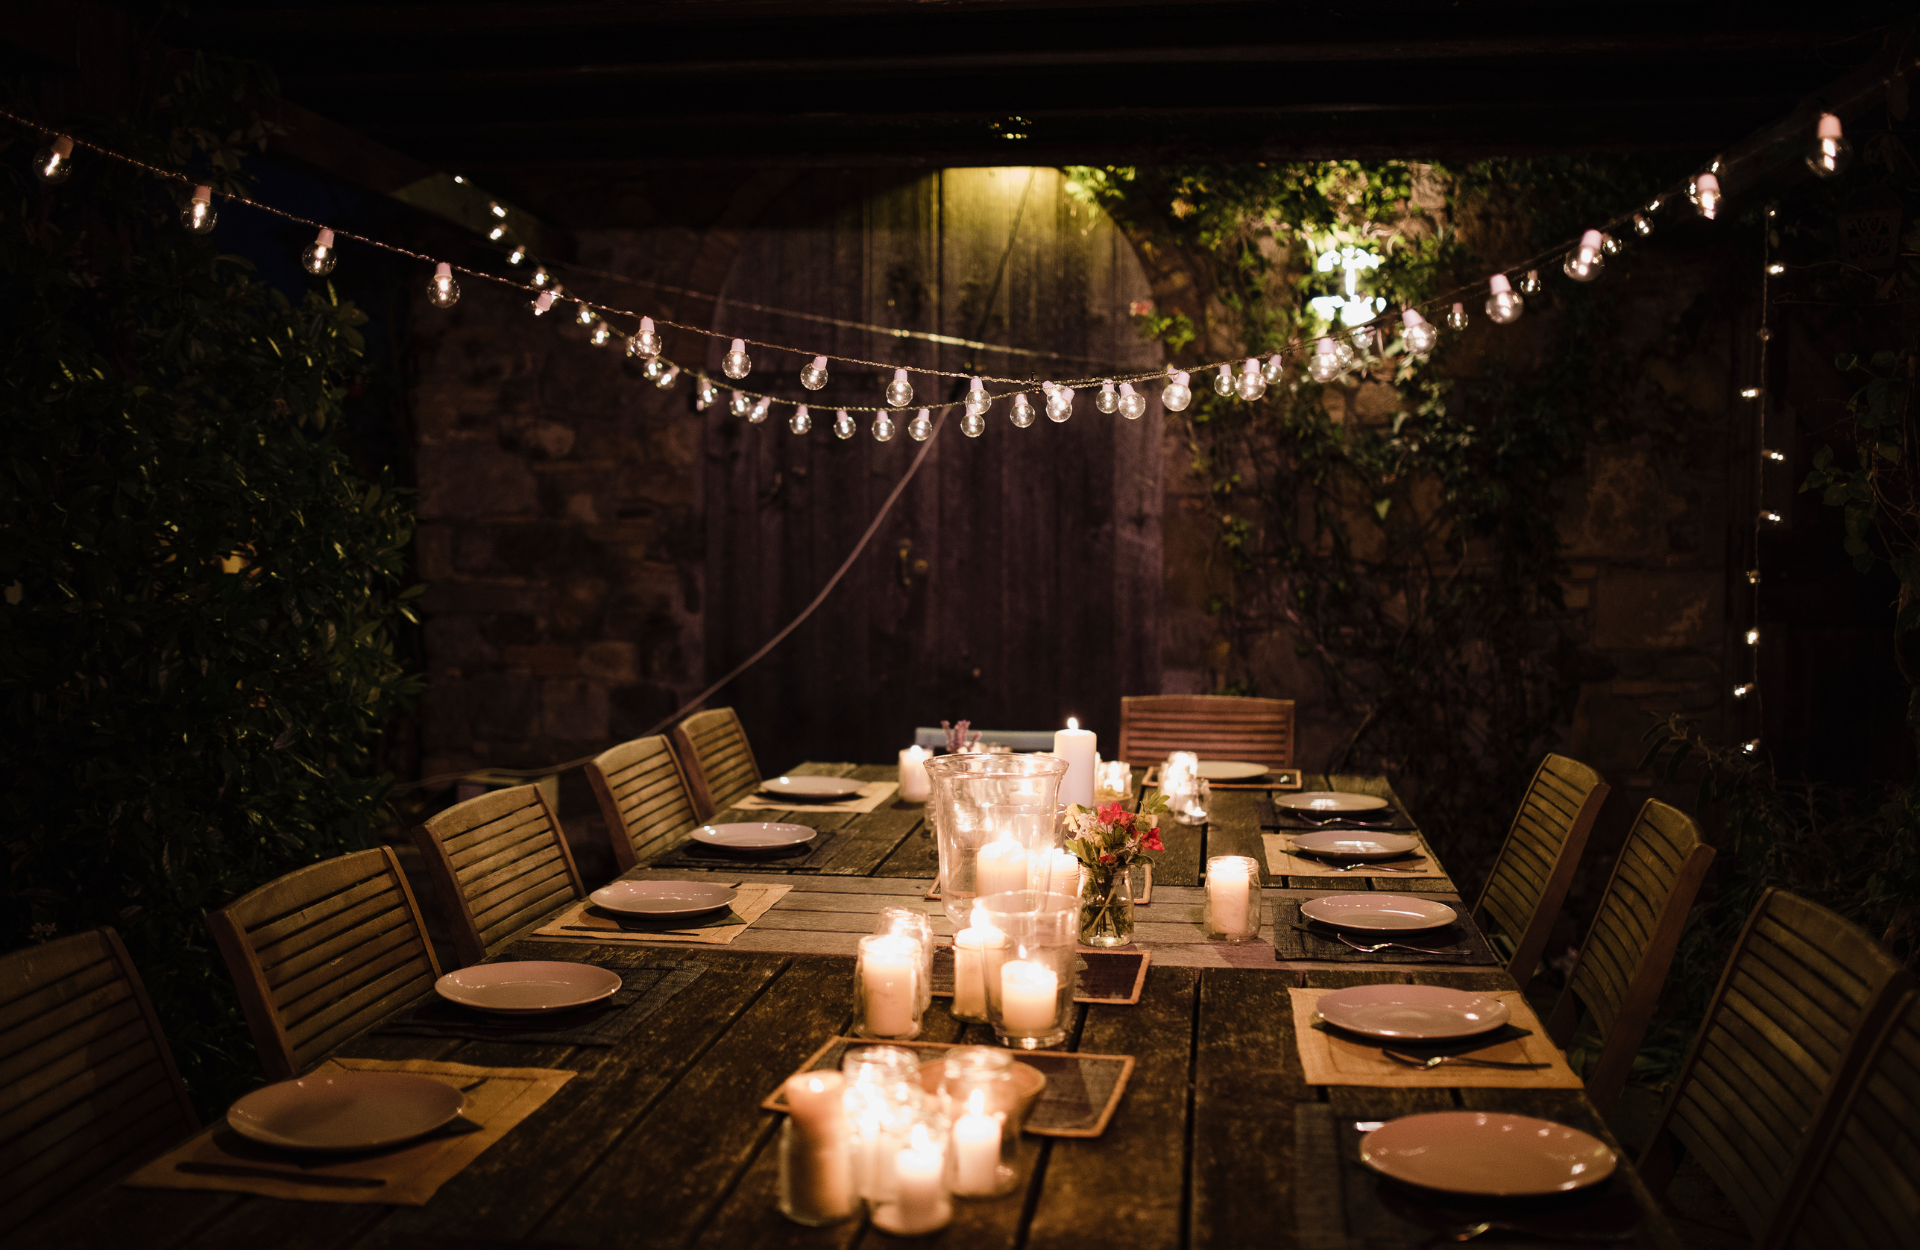 Outdoor dining area with string lights and candles